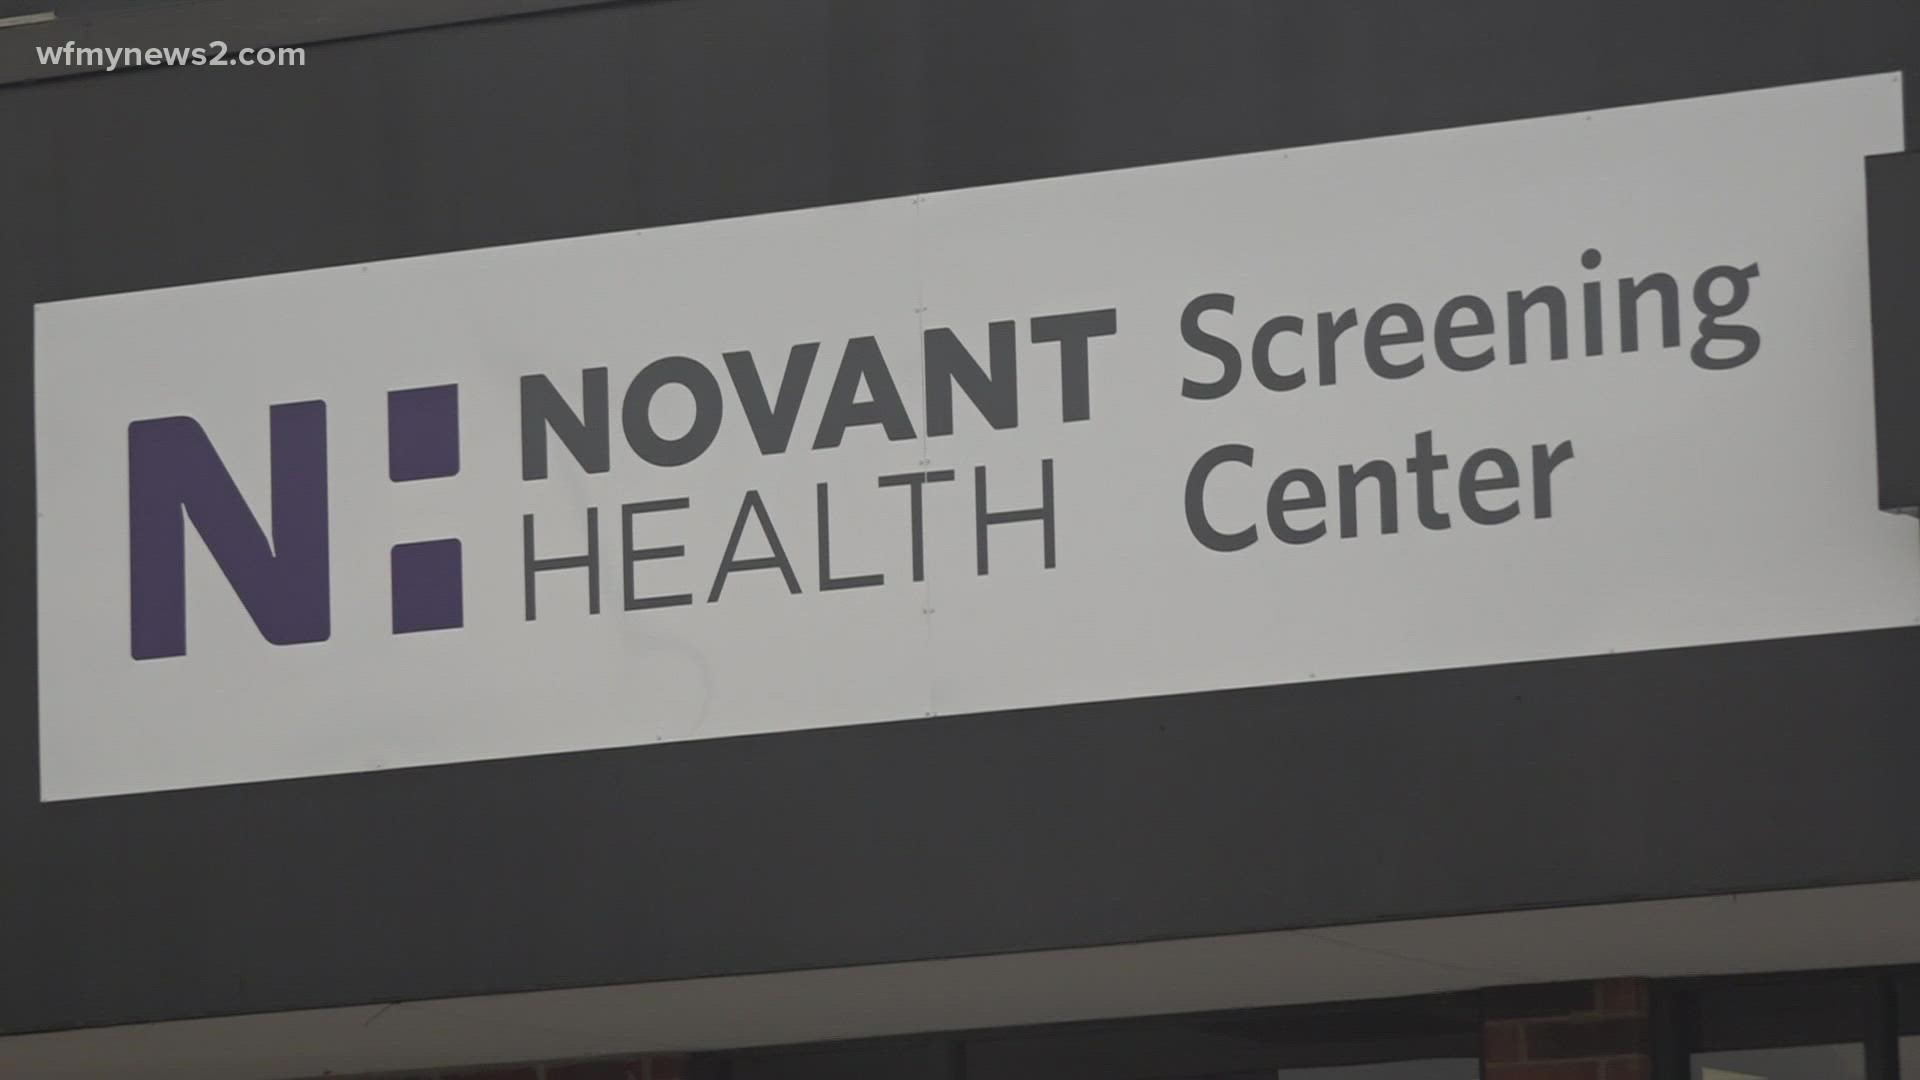 Novant Health reopened its drive-thru testing site at Hanes Mall to accommodate the recent increased demand.